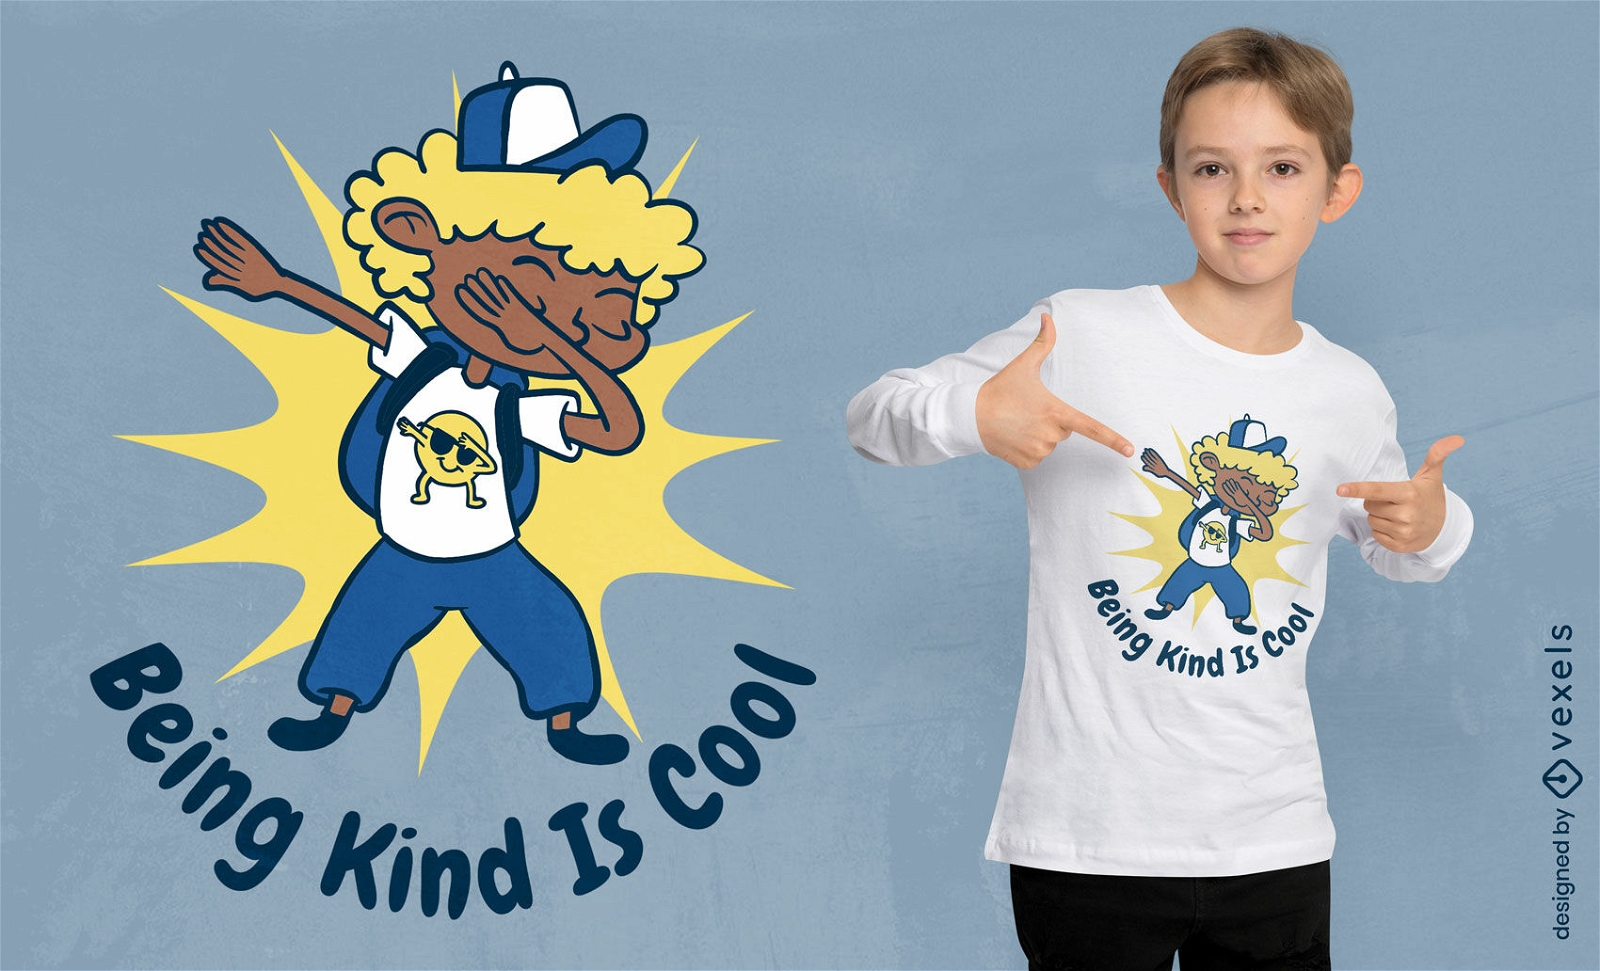 Being kind is cool kid t-shirt design